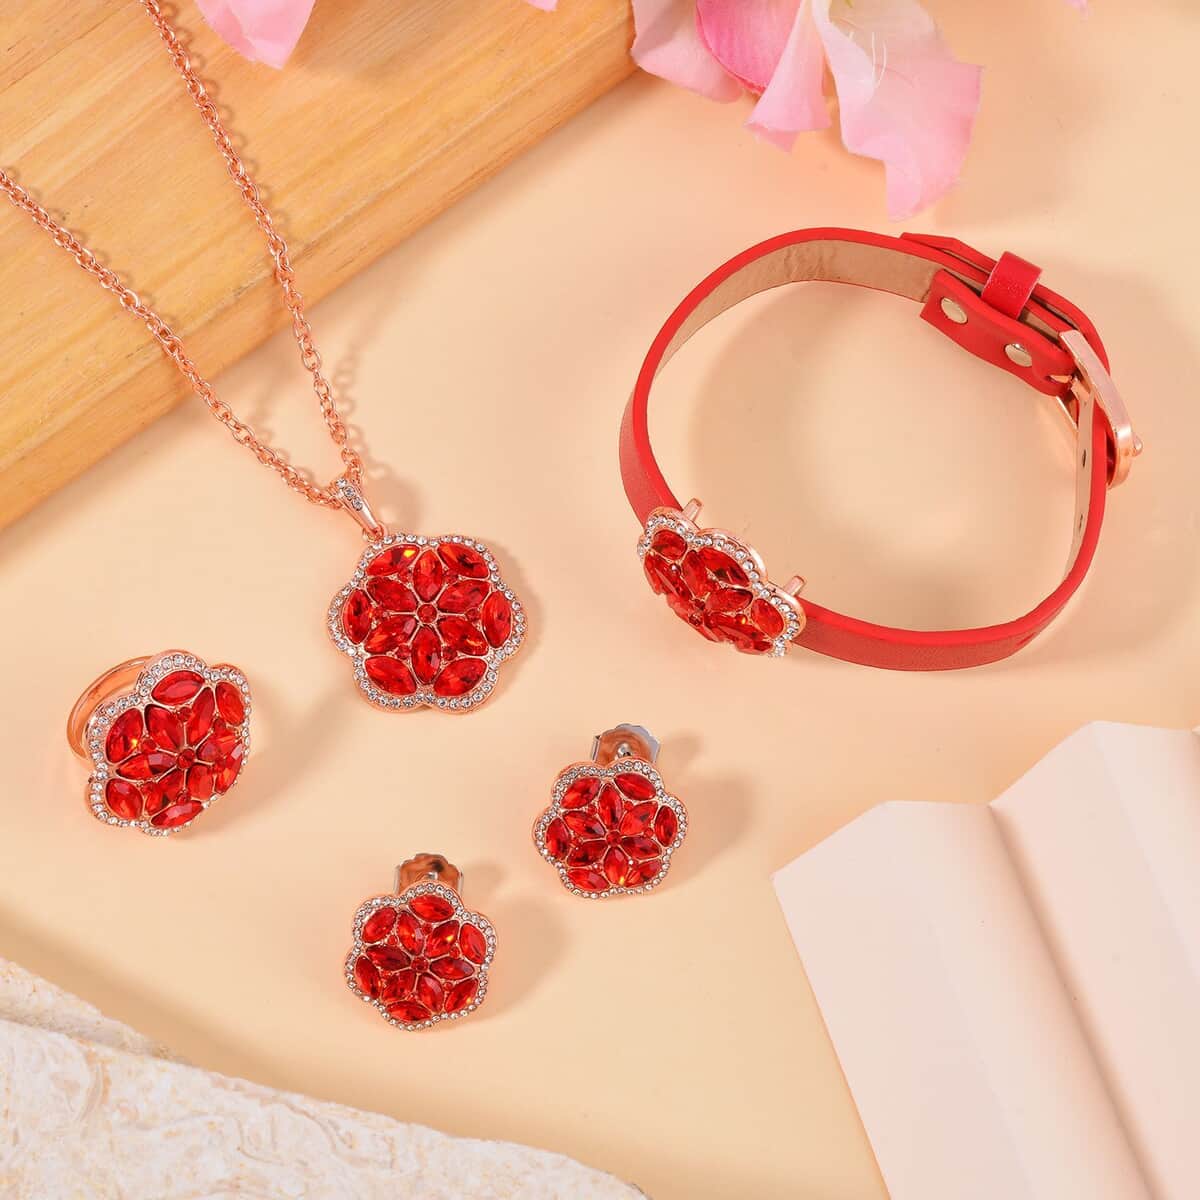 Red and White Austrian Crystal, Faux Leather Floral Bracelet (6-8In), Earrings, Ring (Size 8.0) and Pendant Necklace 20-22 Inches In Rosetone image number 1